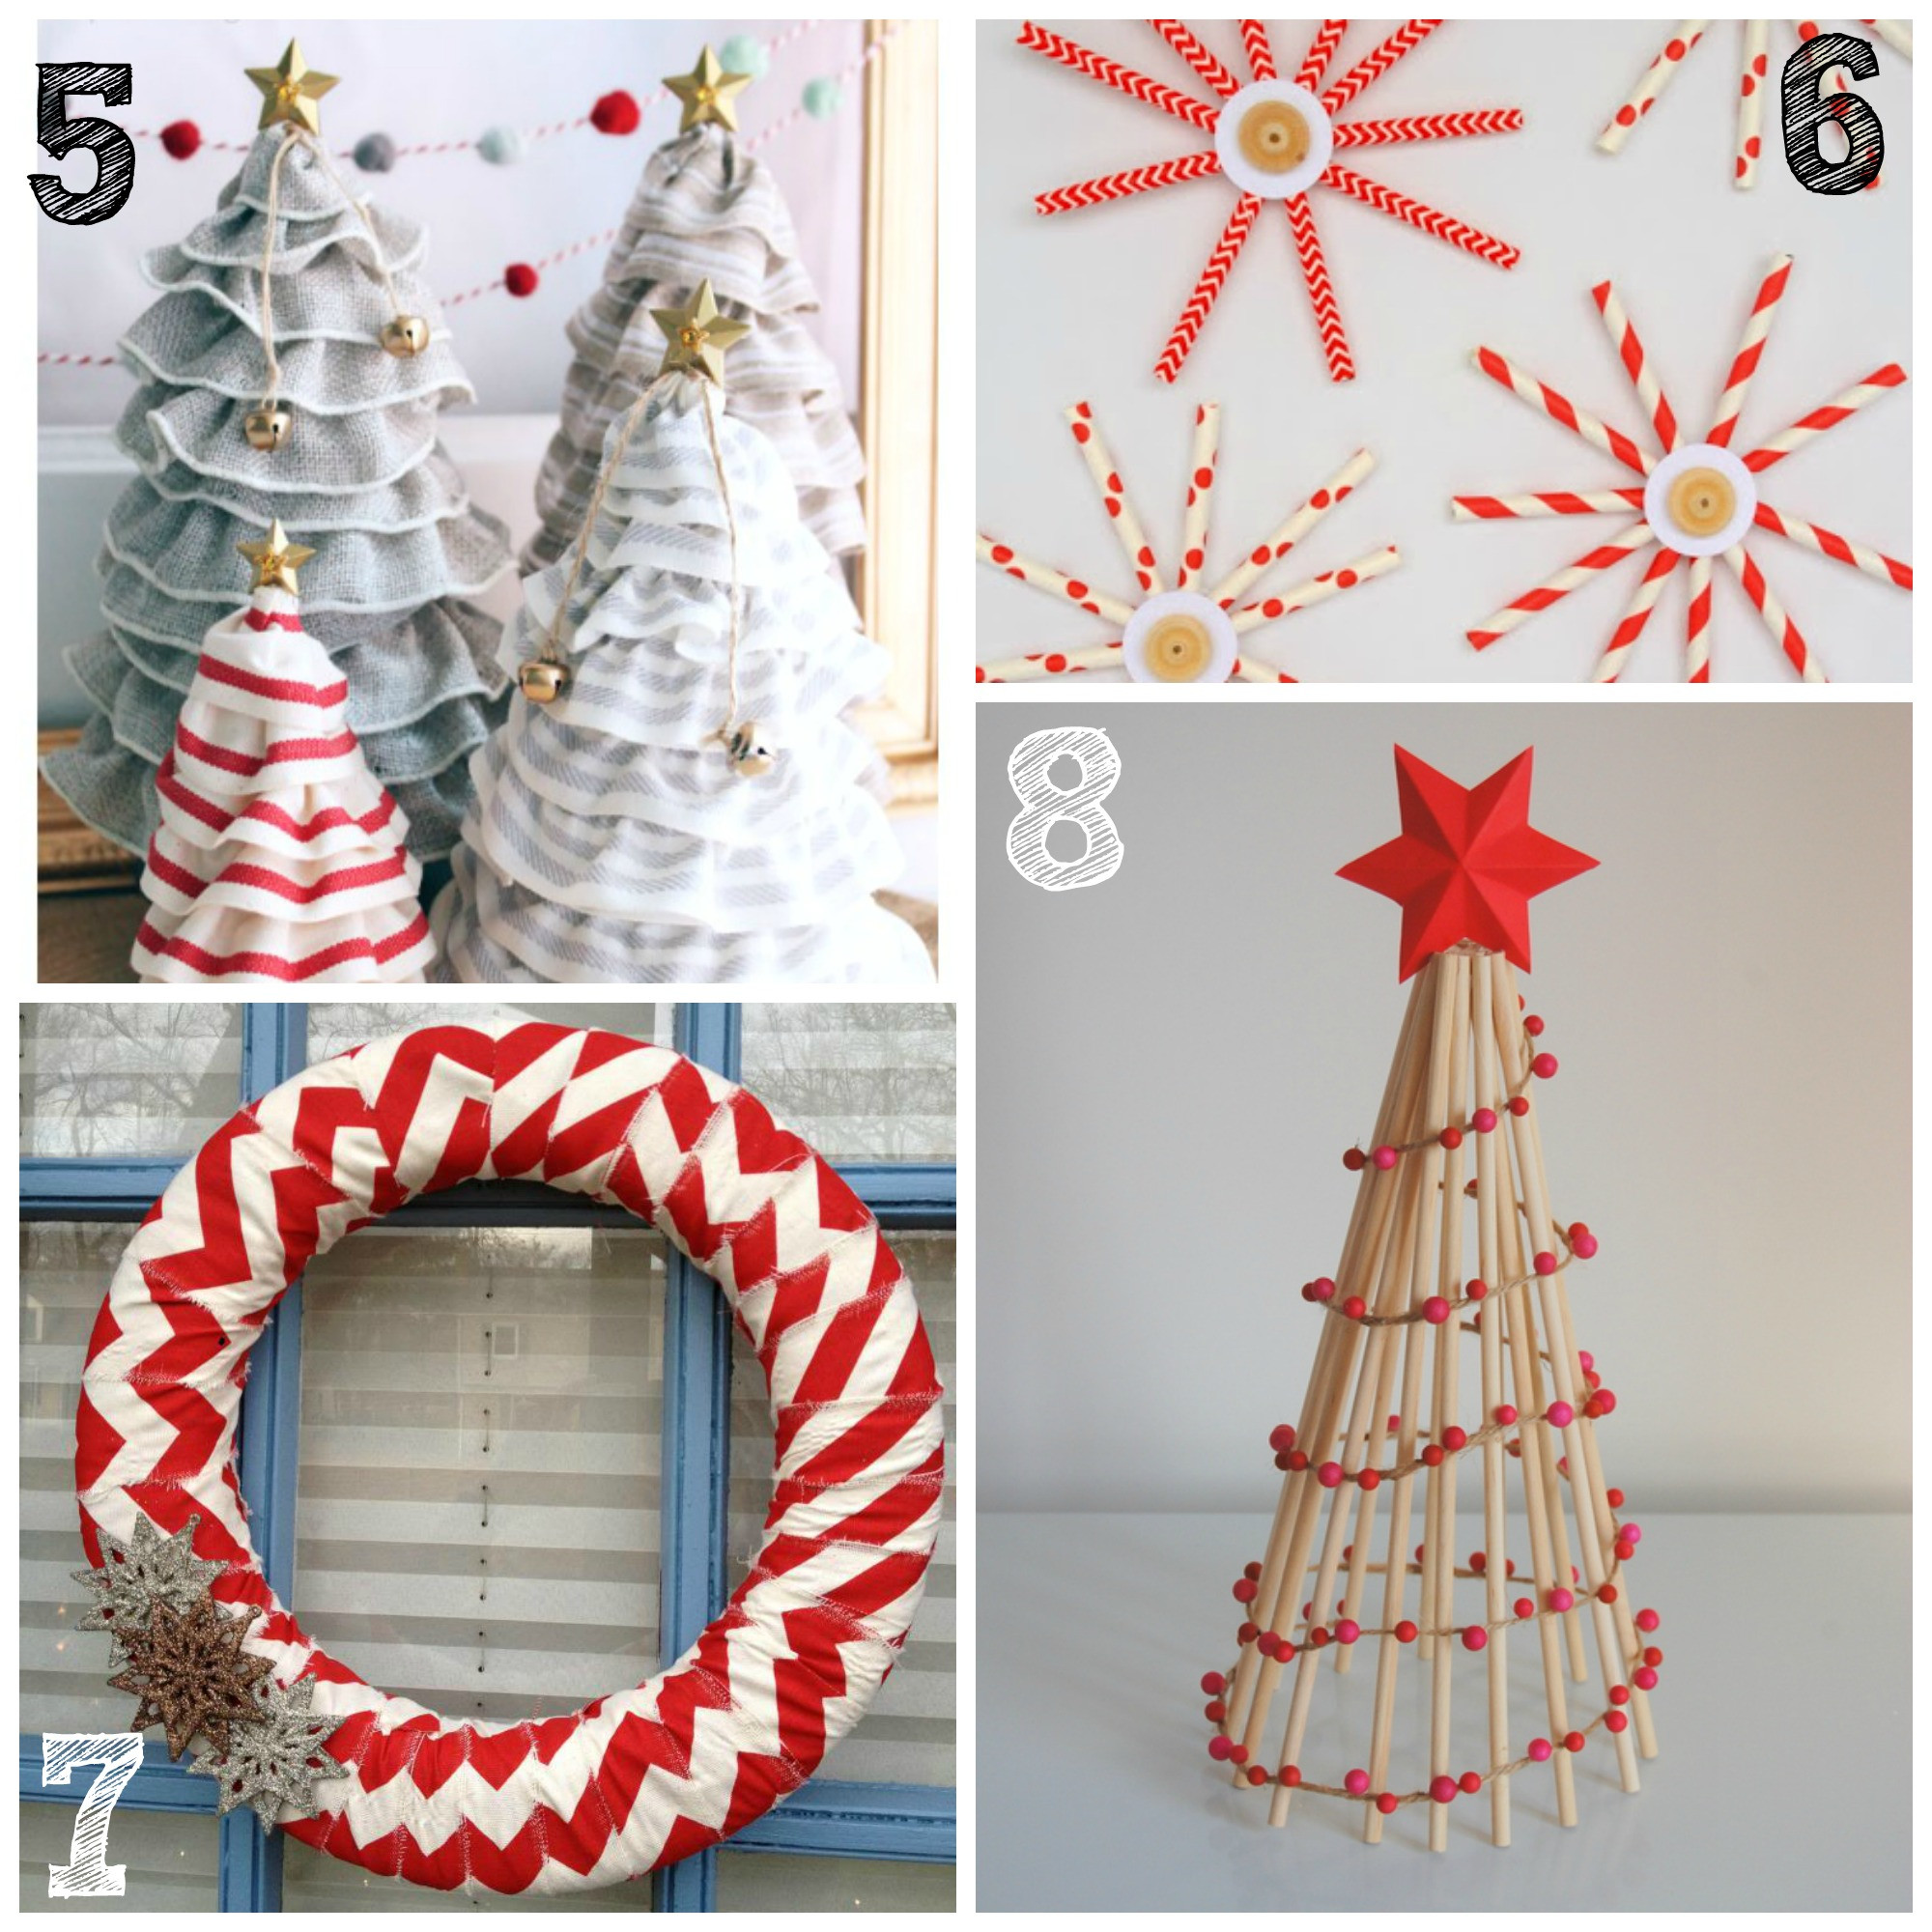 DIY Holiday Decorations Ideas
 CANT TAKE UR EYES OF THE BEAUTIFUL HANDMADE CHRISTMAS